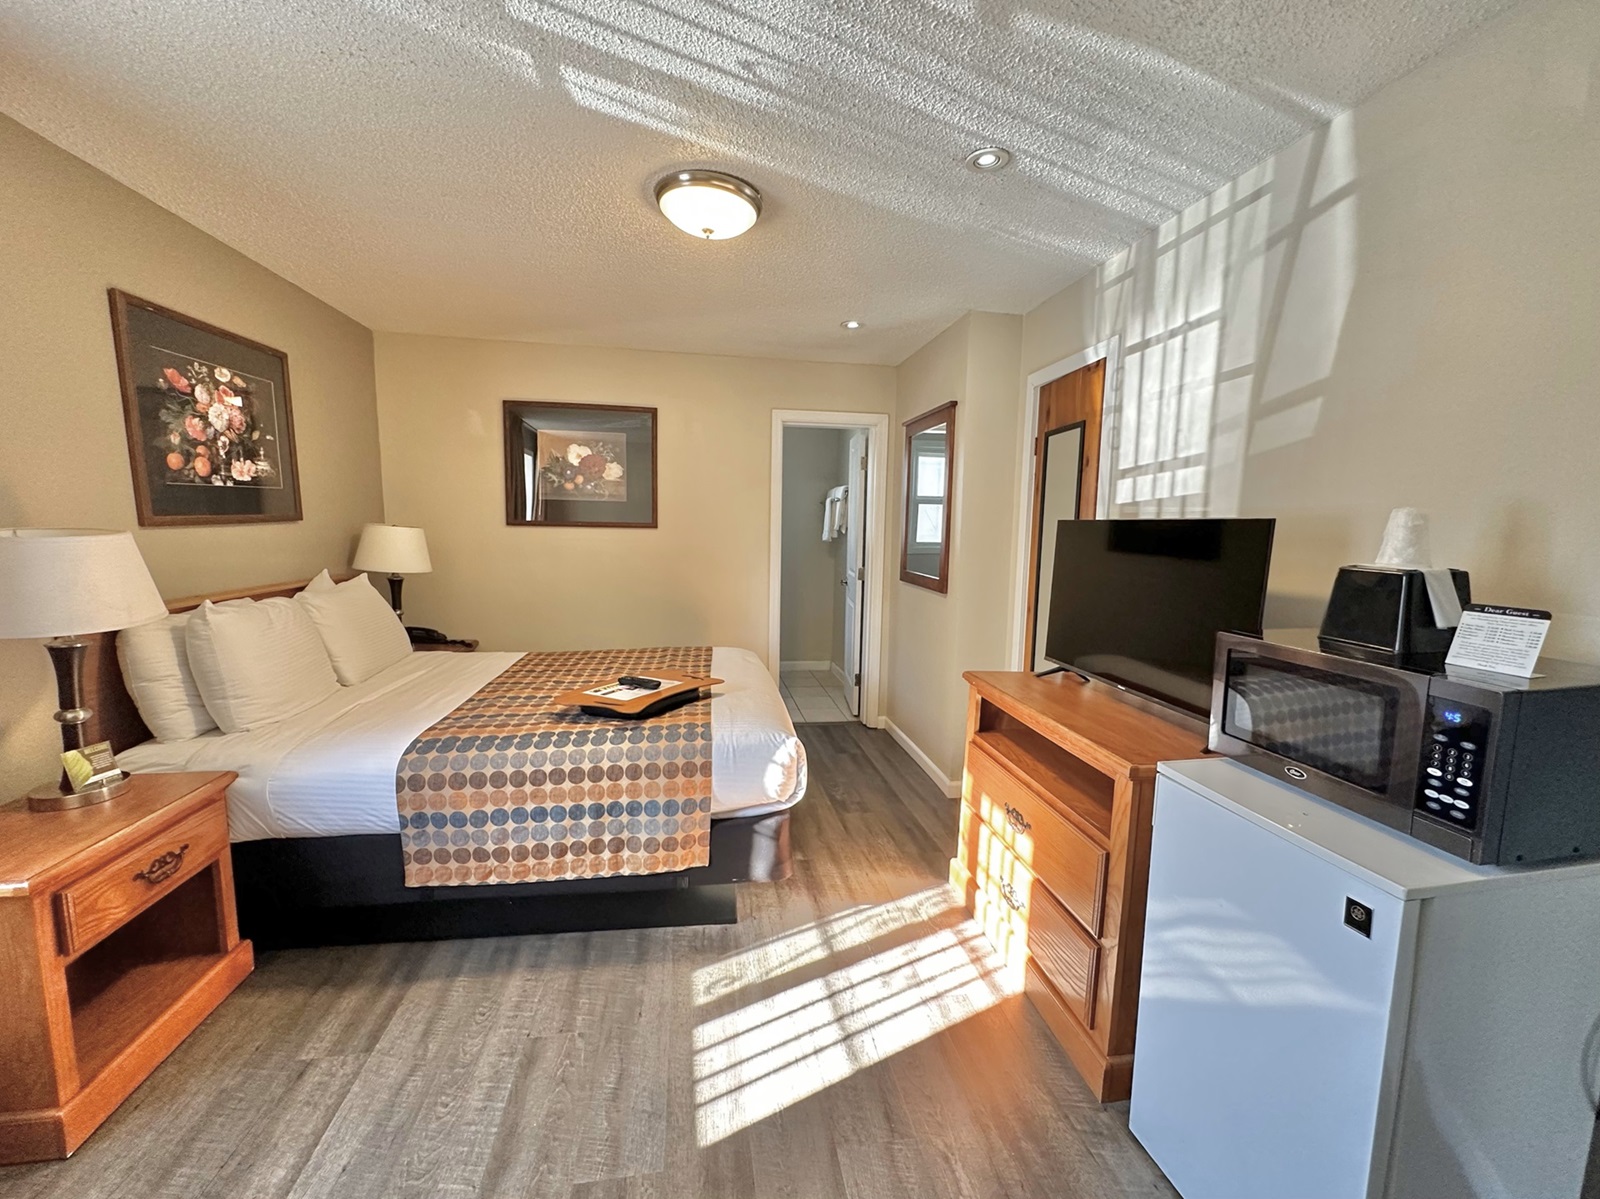 Experience Comfort and Convenience in our Deluxe Rooms at Courtesy Inn Eugene